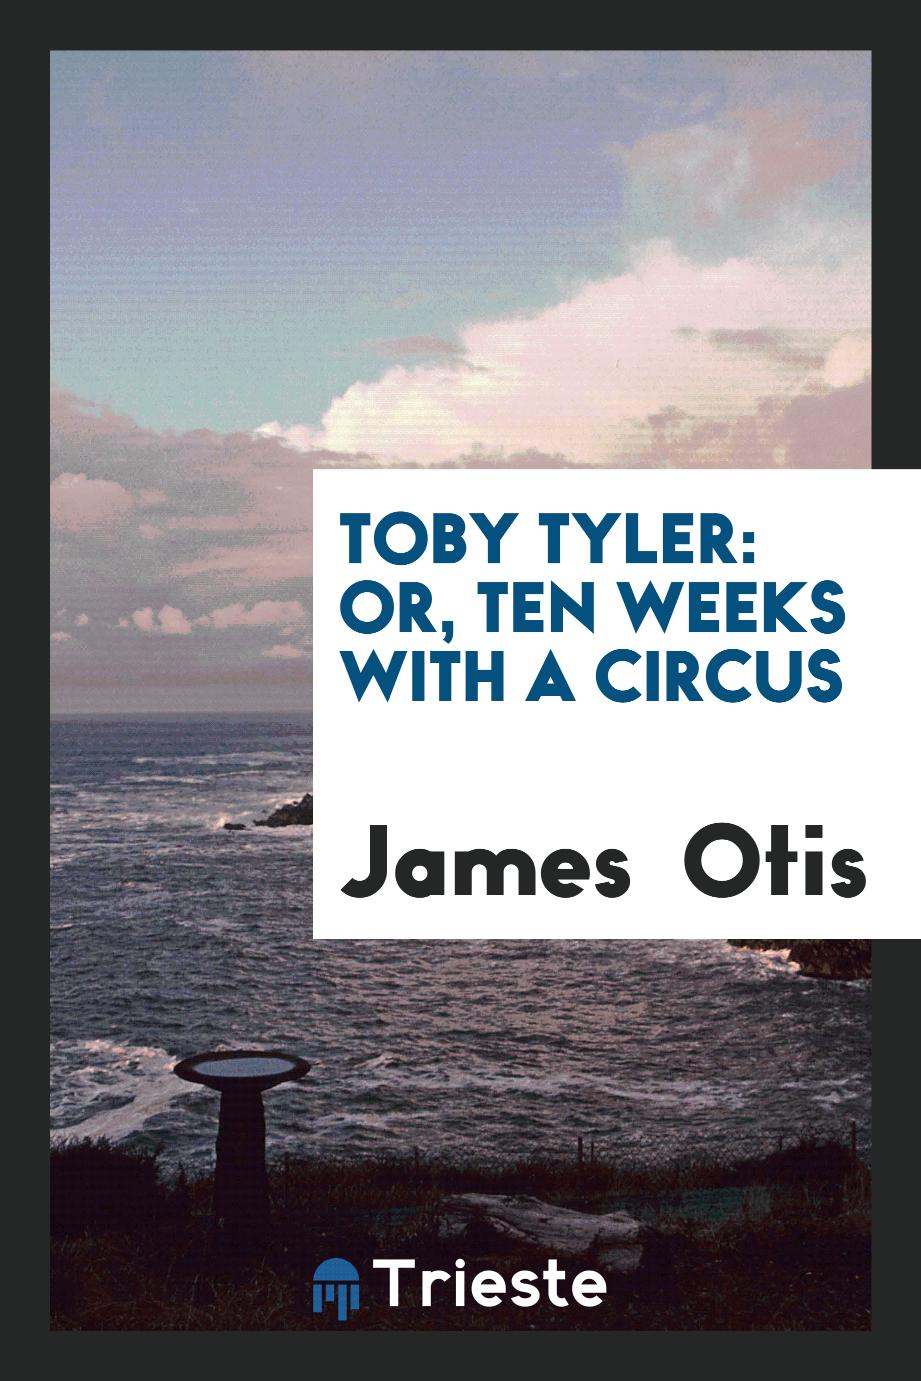 Toby Tyler: or, Ten weeks with a Circus